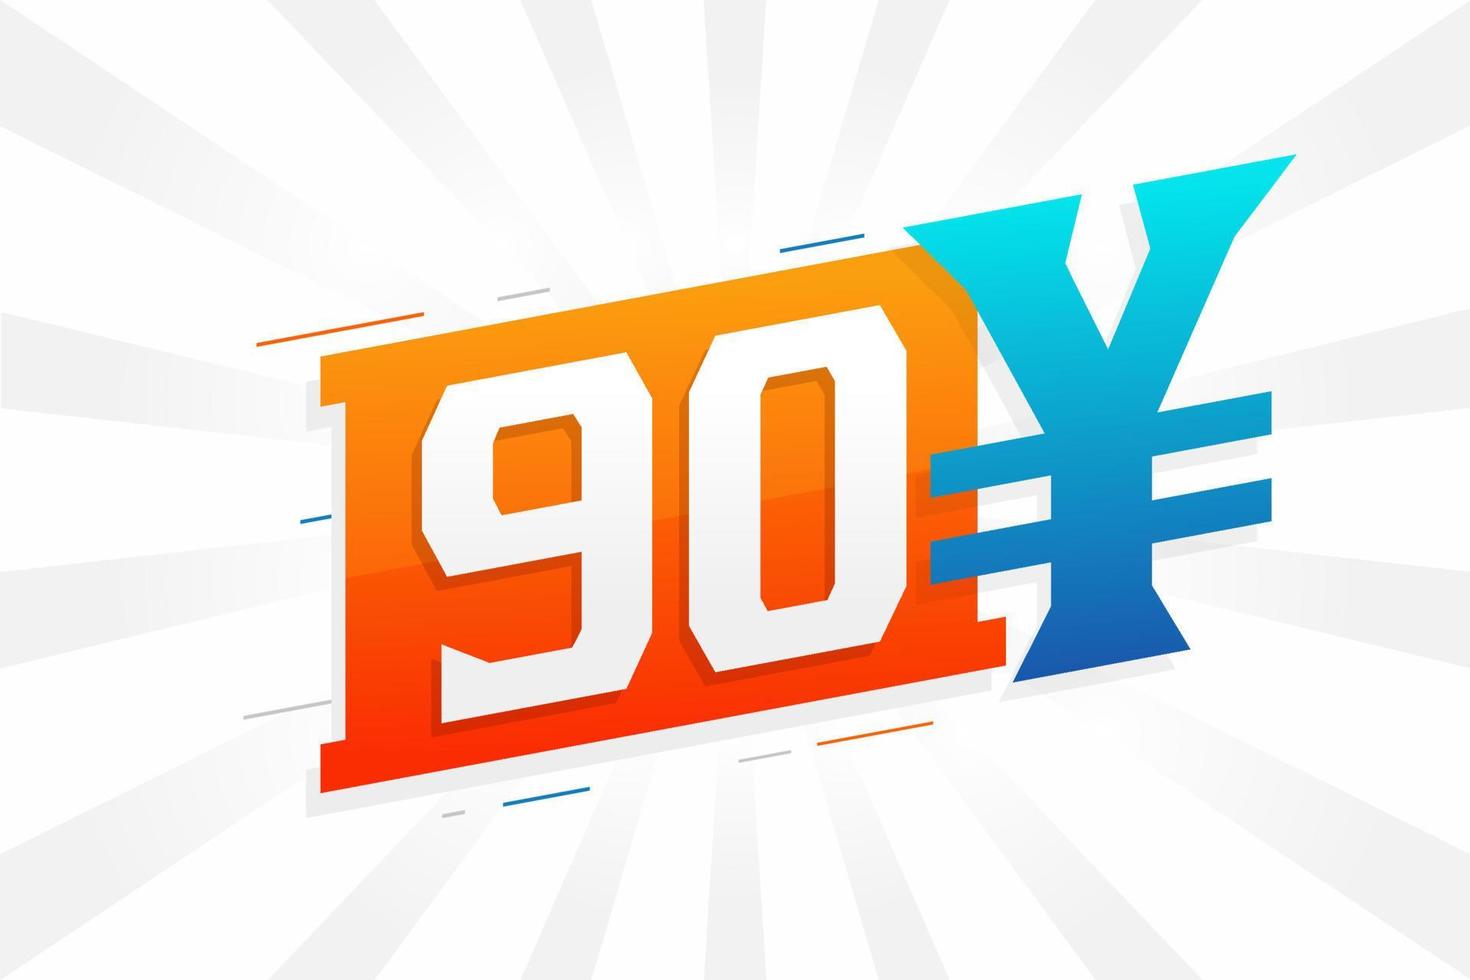 90 Yuan Chinese currency vector text symbol. 90 Yen Japanese currency Money stock vector